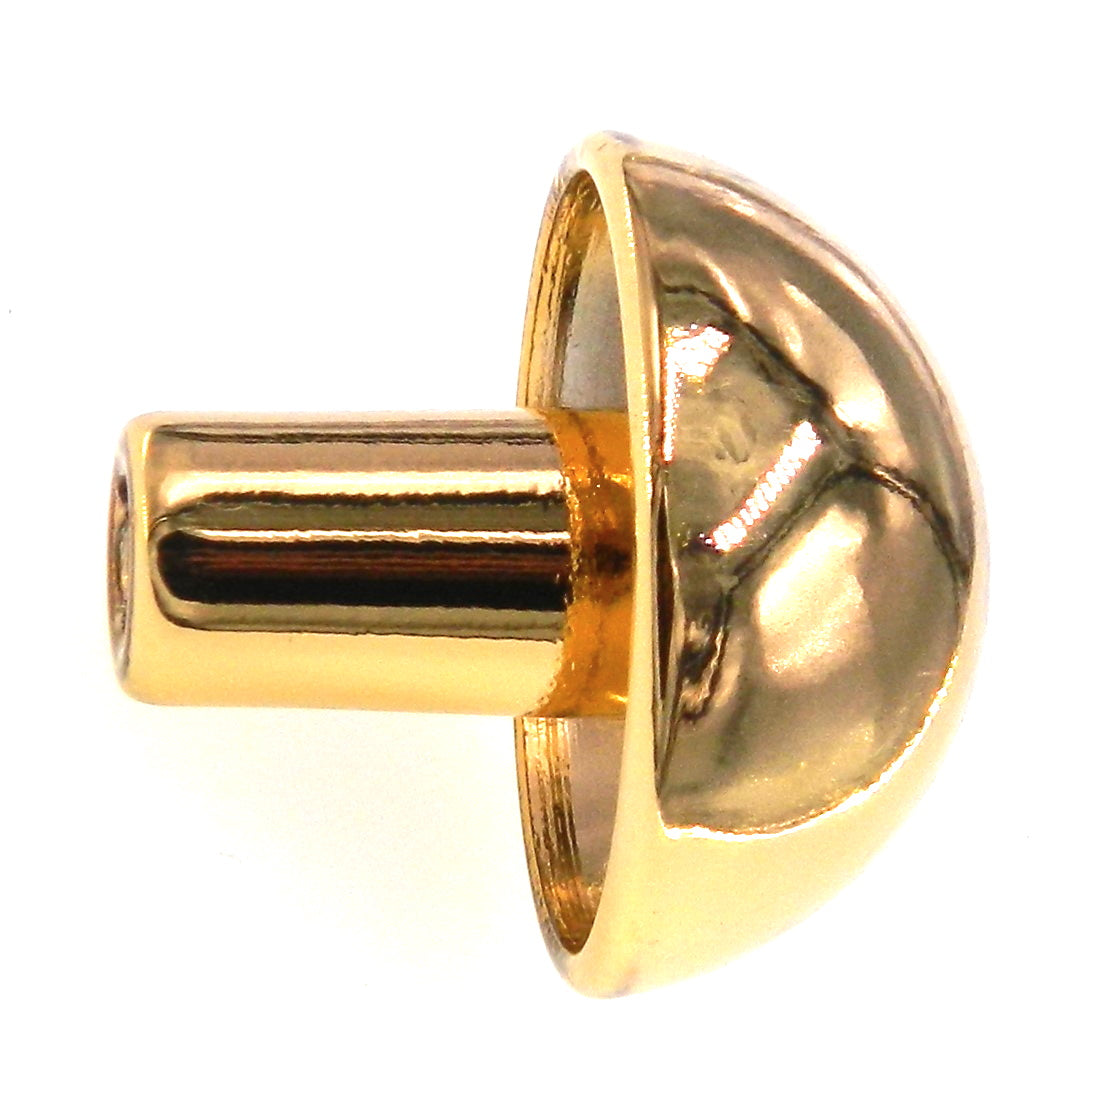 Amerock Forges Gold Plated 1-3/16" Round Cabinet Knob B309-B-AU Made in Italy